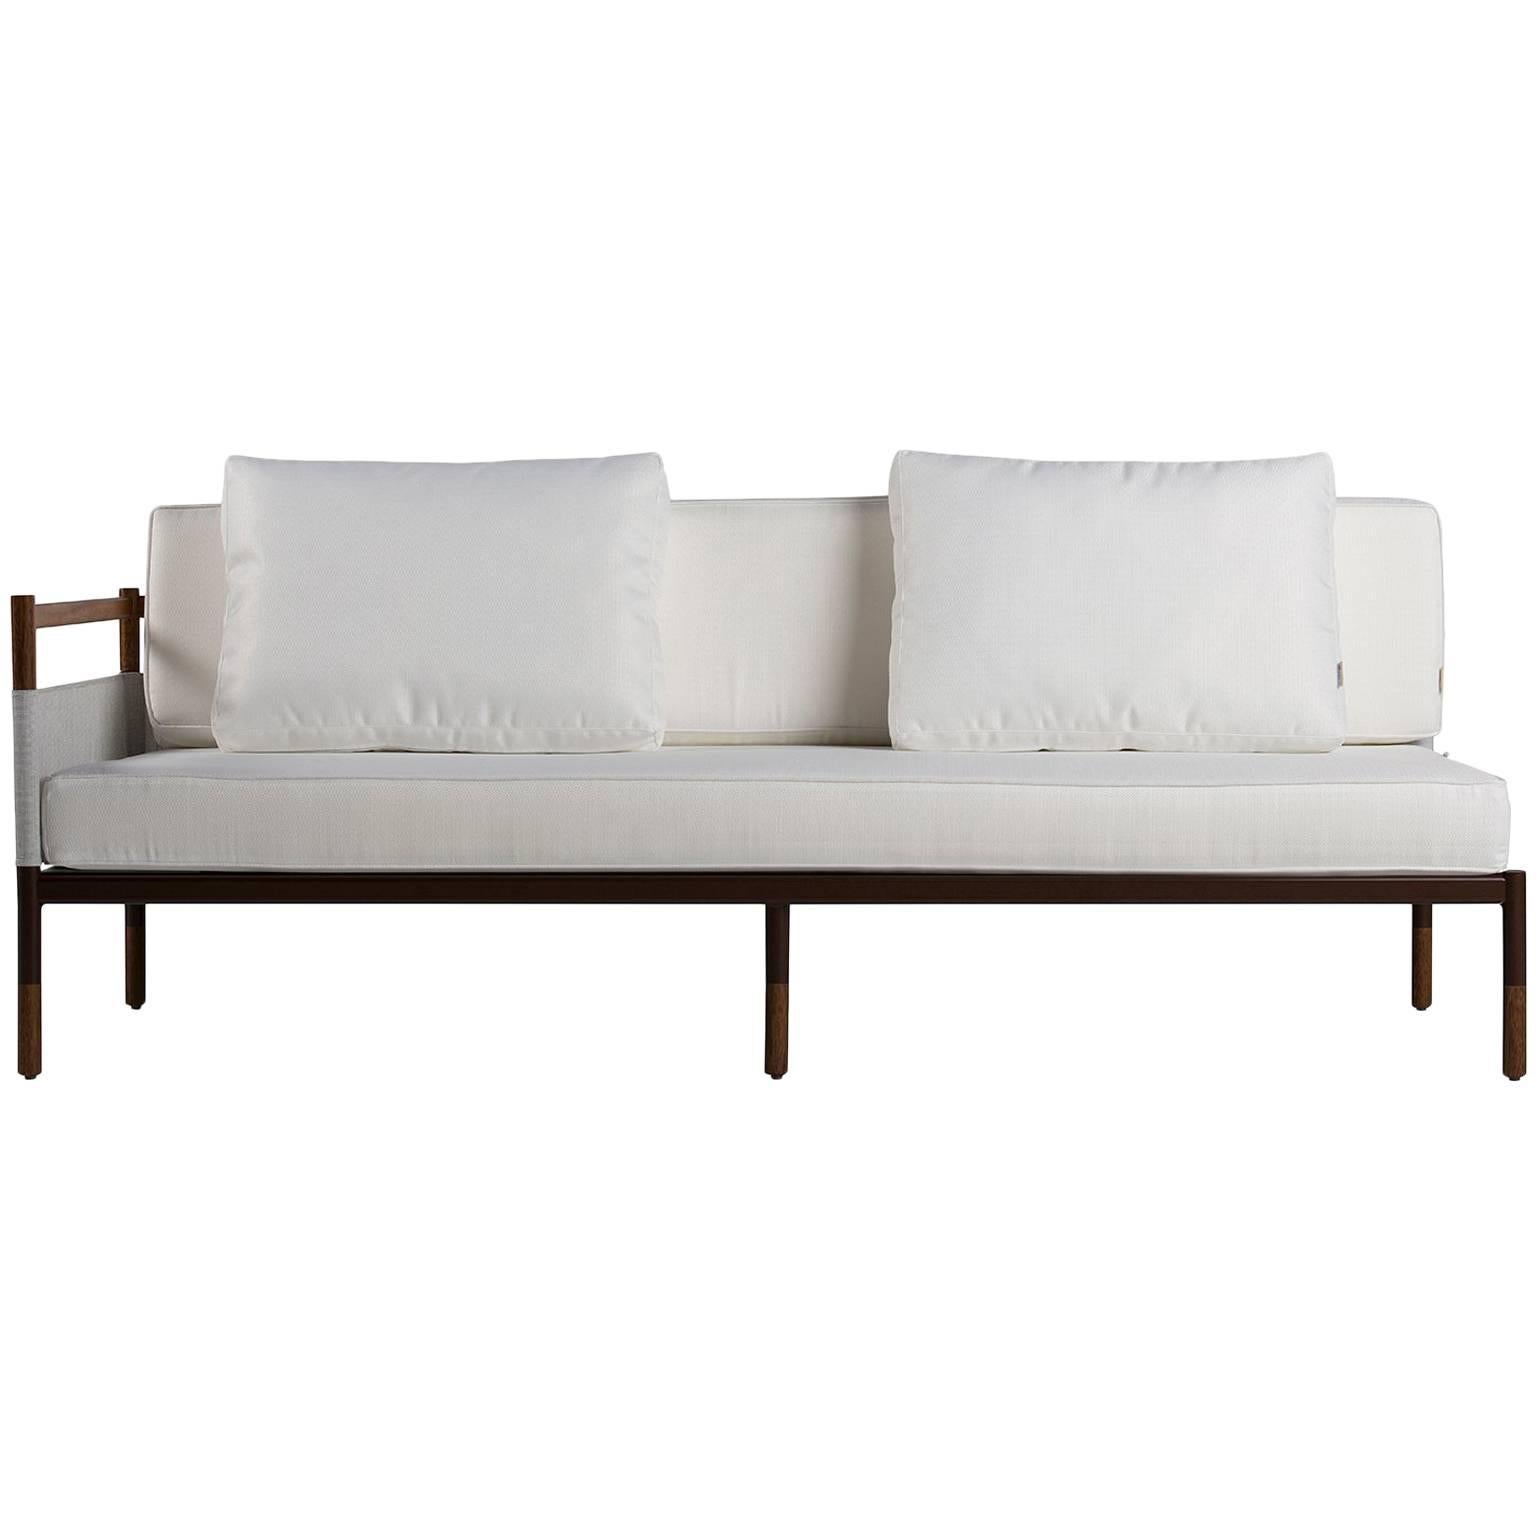 Minimalist Sofa in Hardwood, Metal and Fabric, Usable Outdoors For Sale